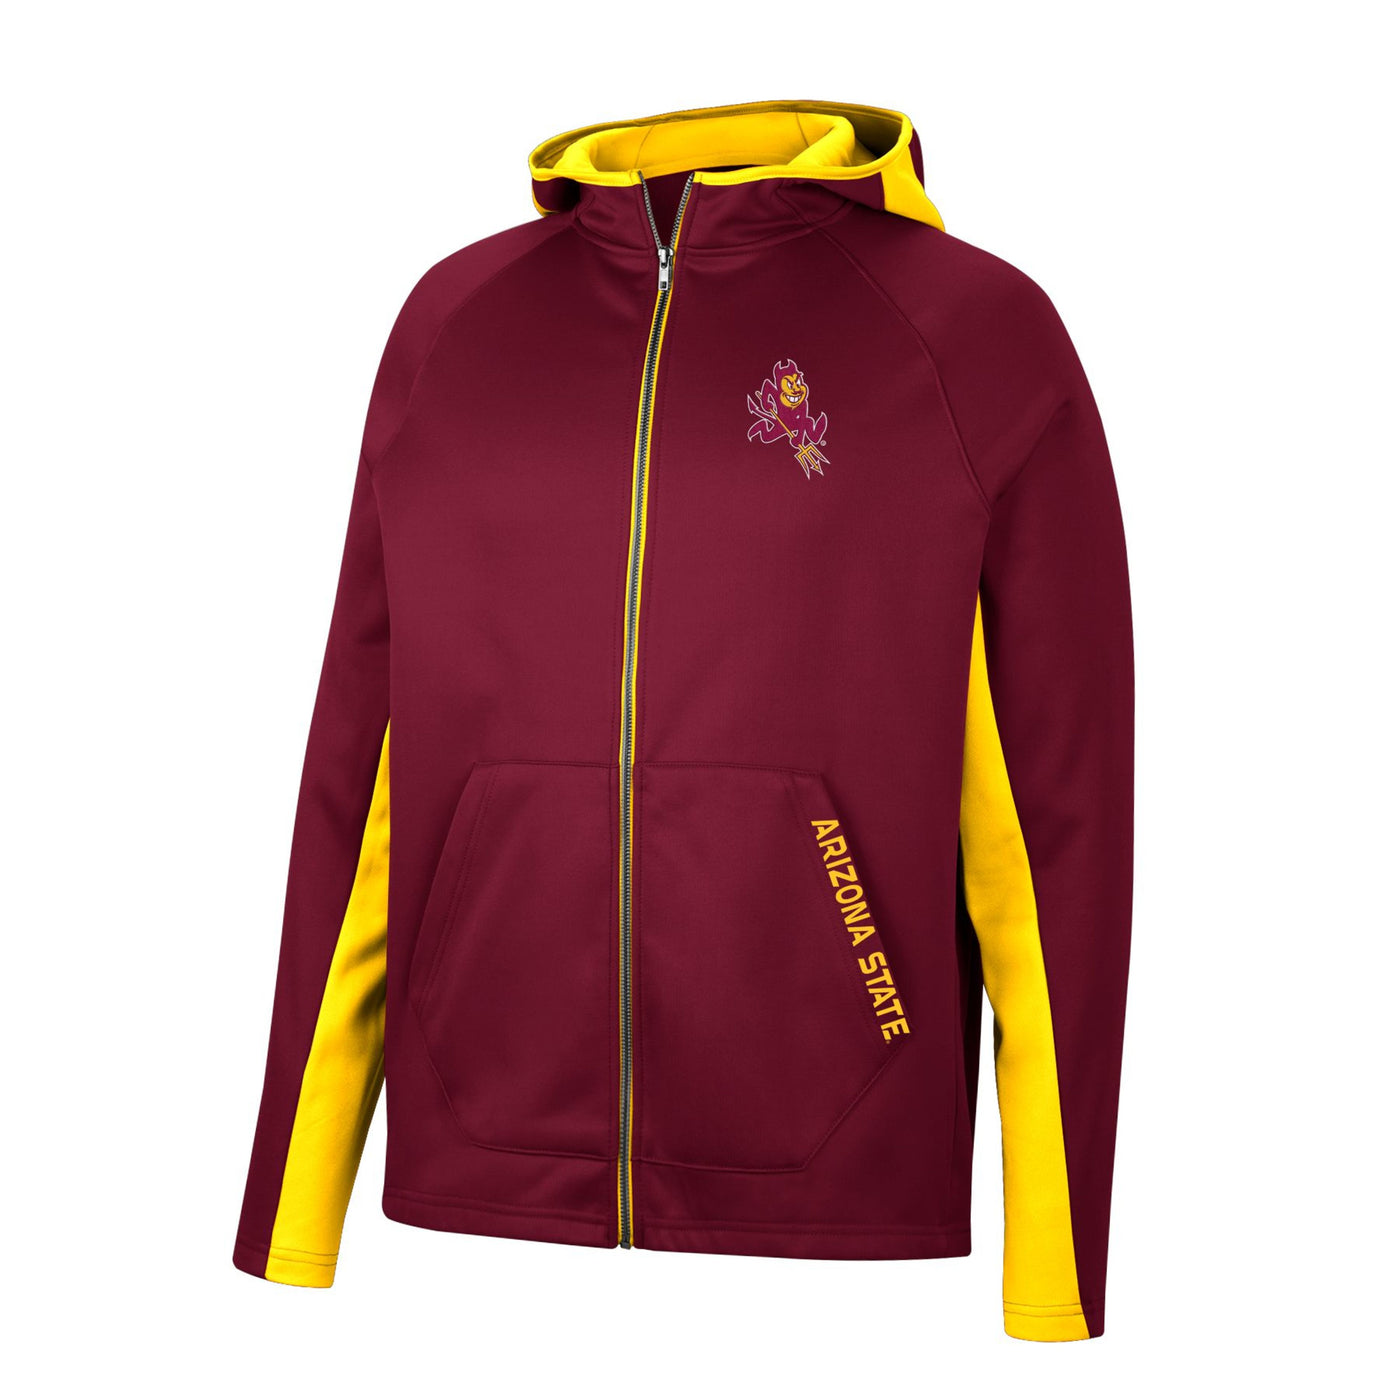 ASU maroon and gold full size hoody with a sparky on the chest and Arizona State letters down the side of the pocket